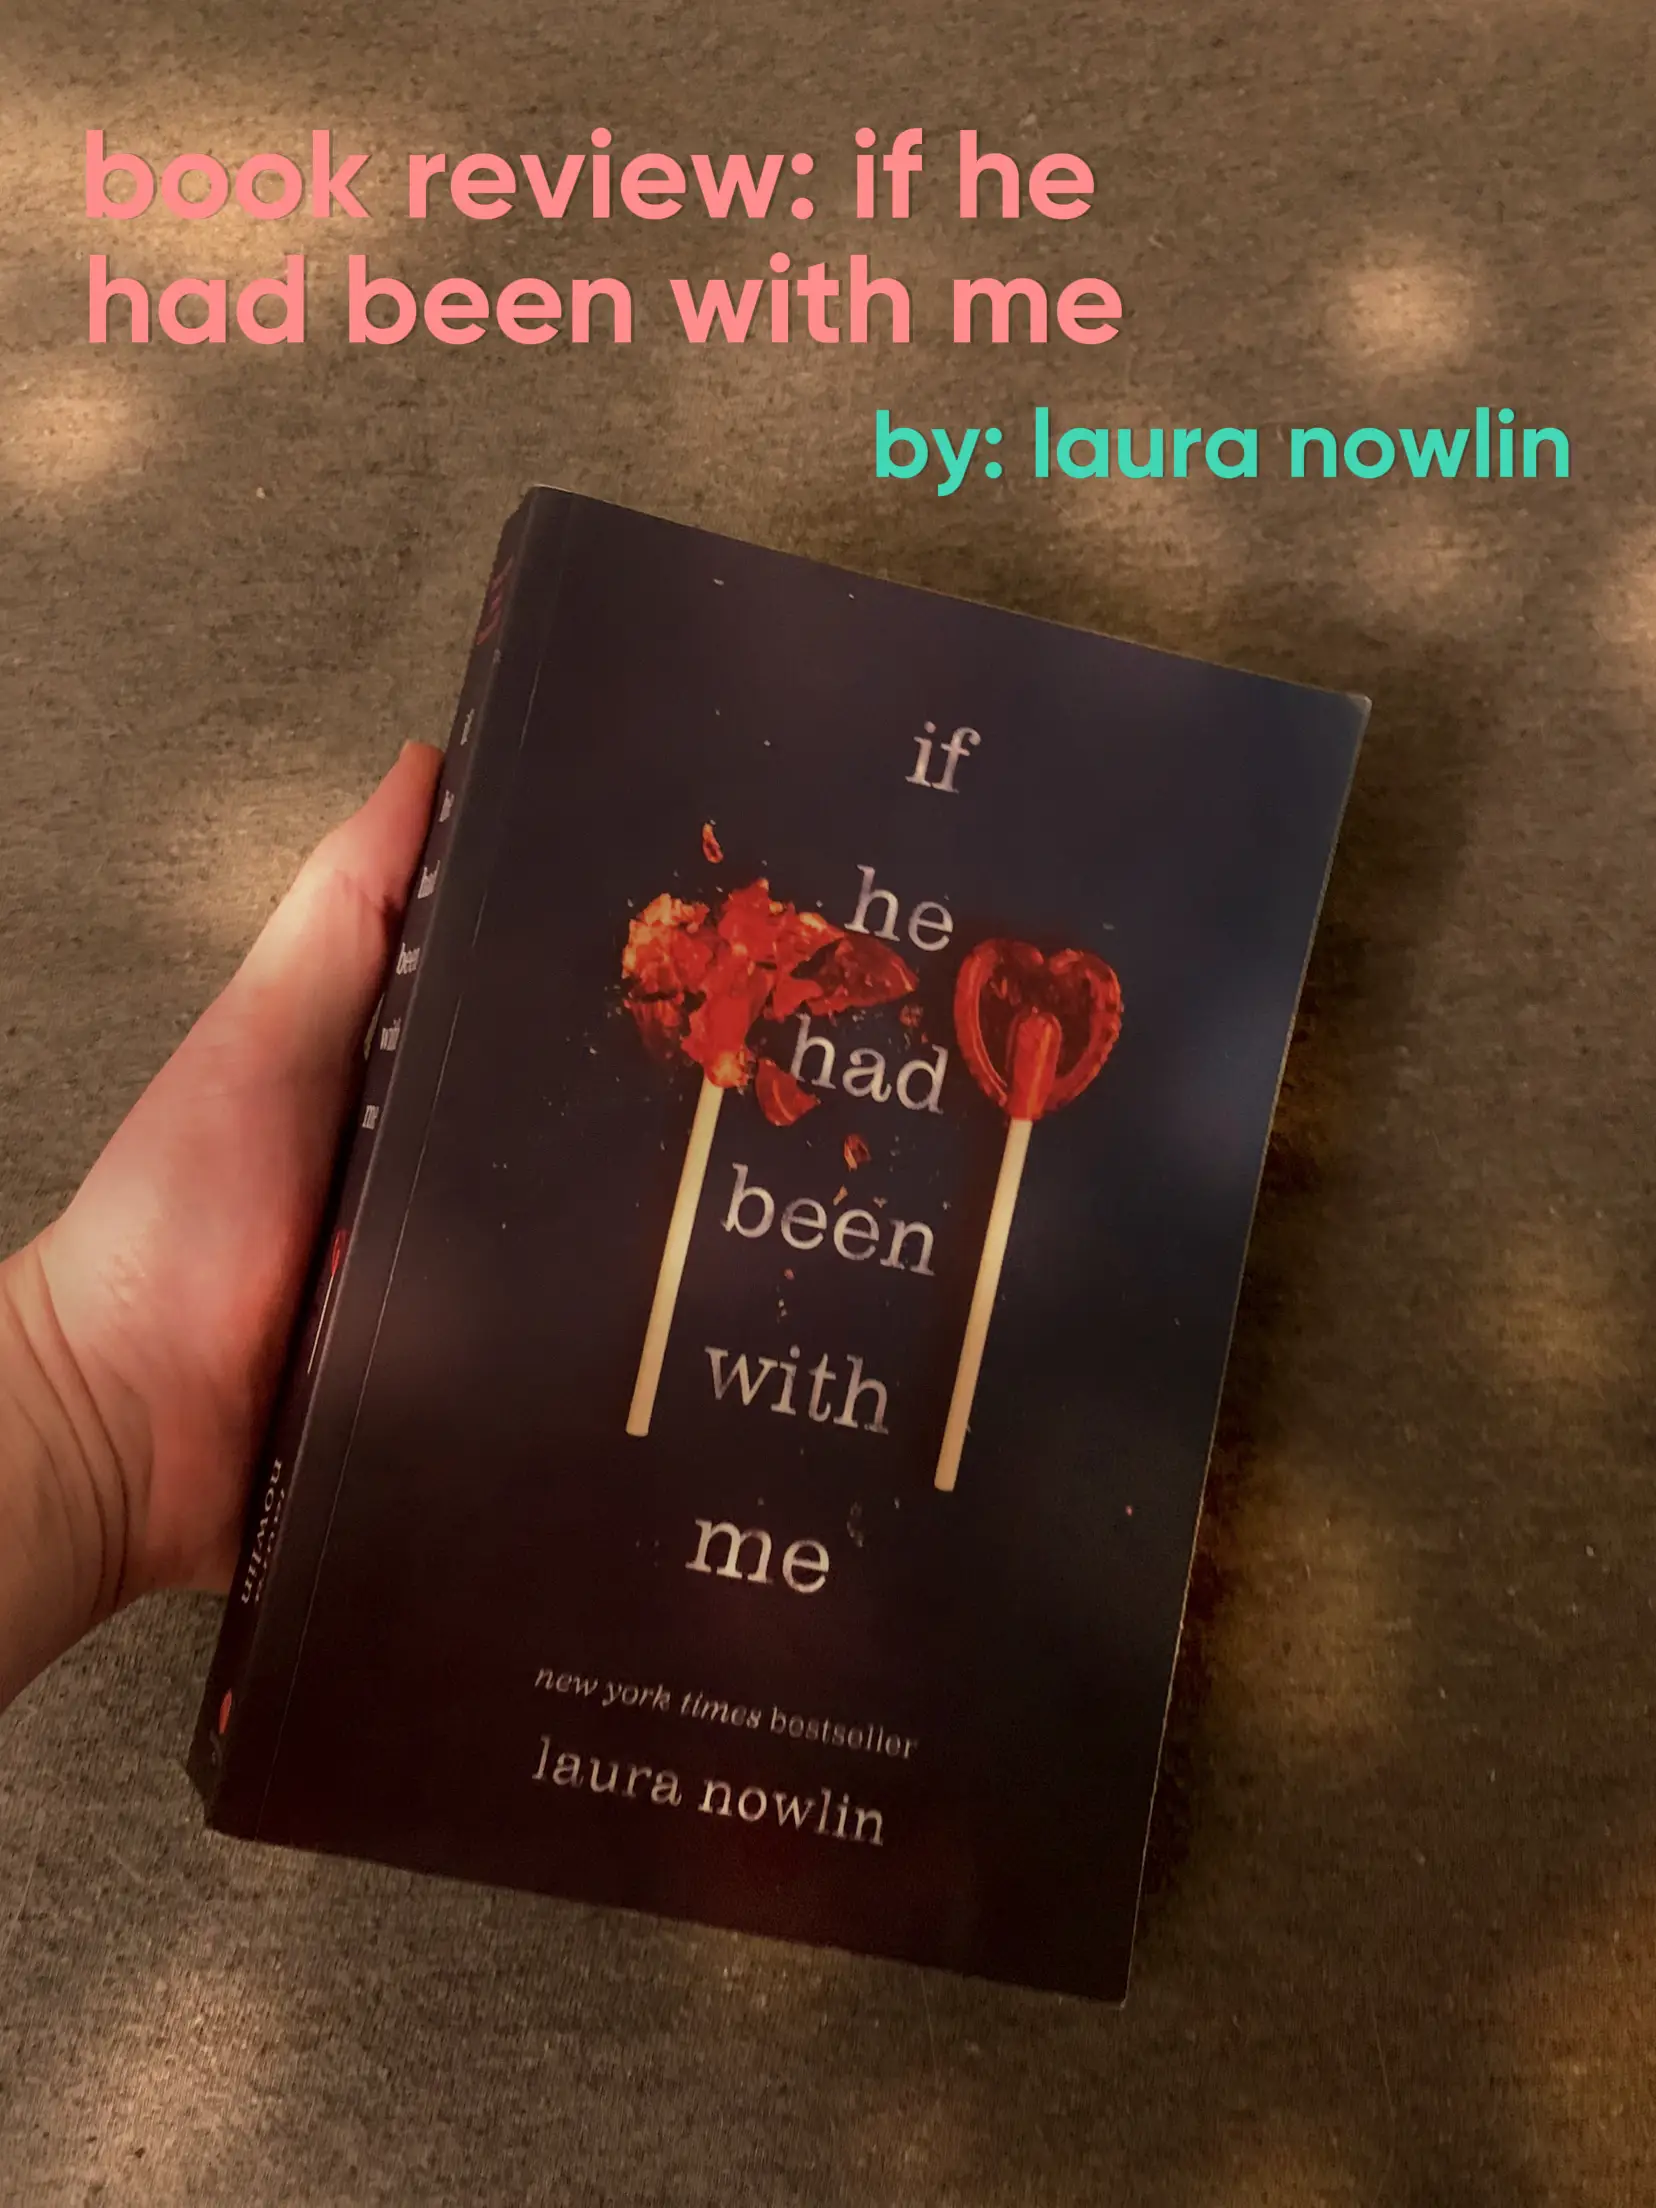 book review: if he had been with me, Gallery posted by aubrey petris